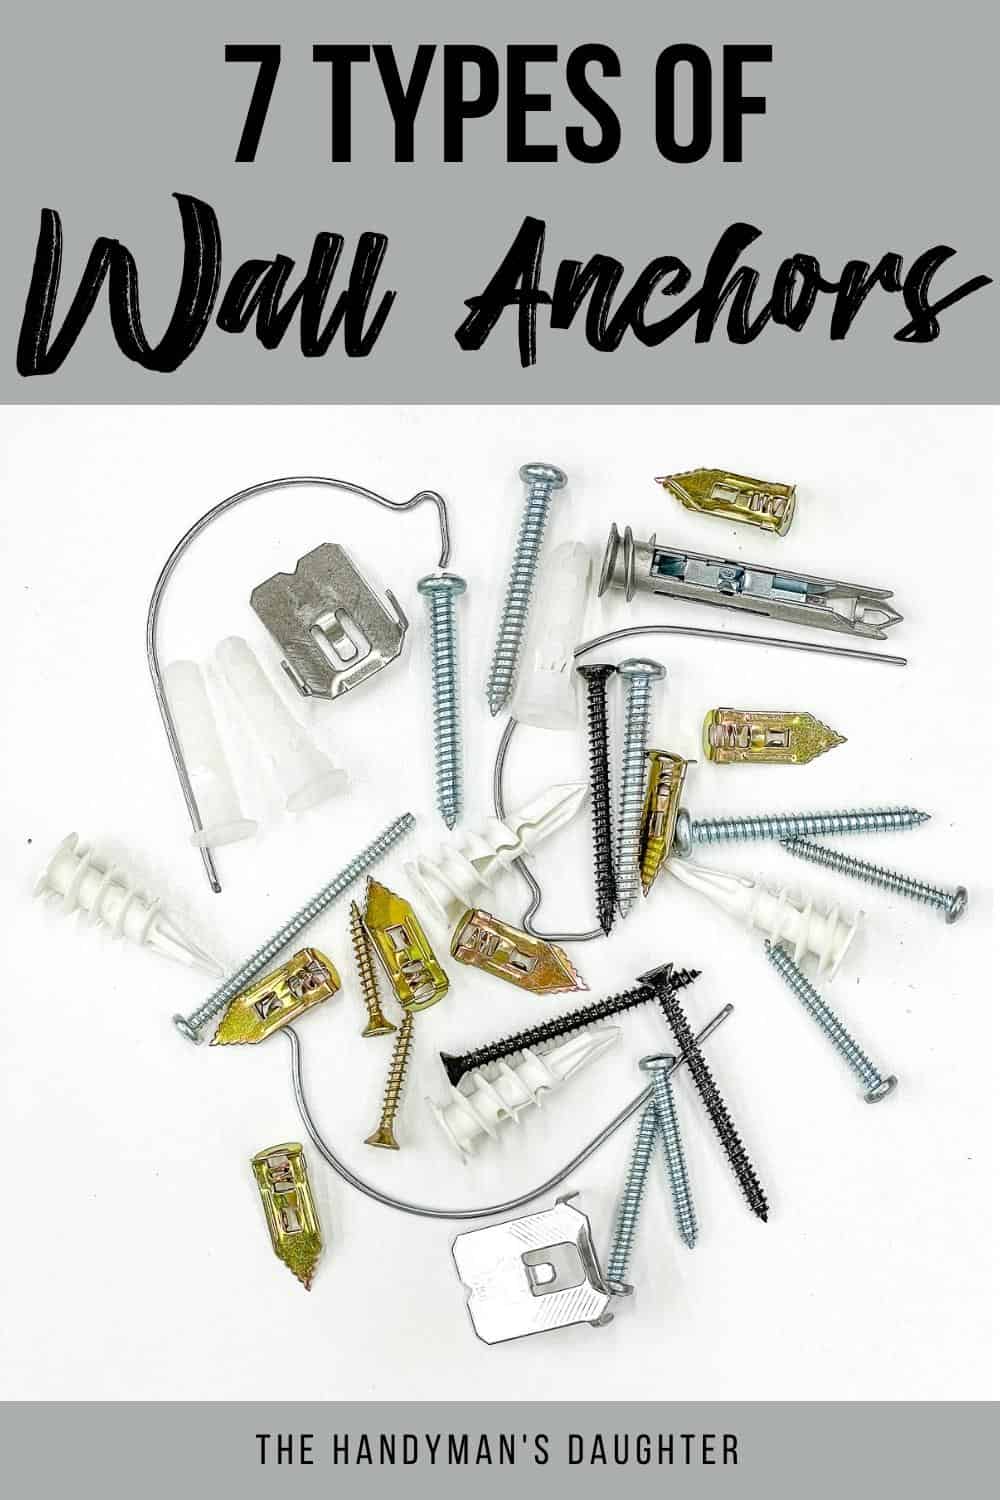 7 types of wall anchors